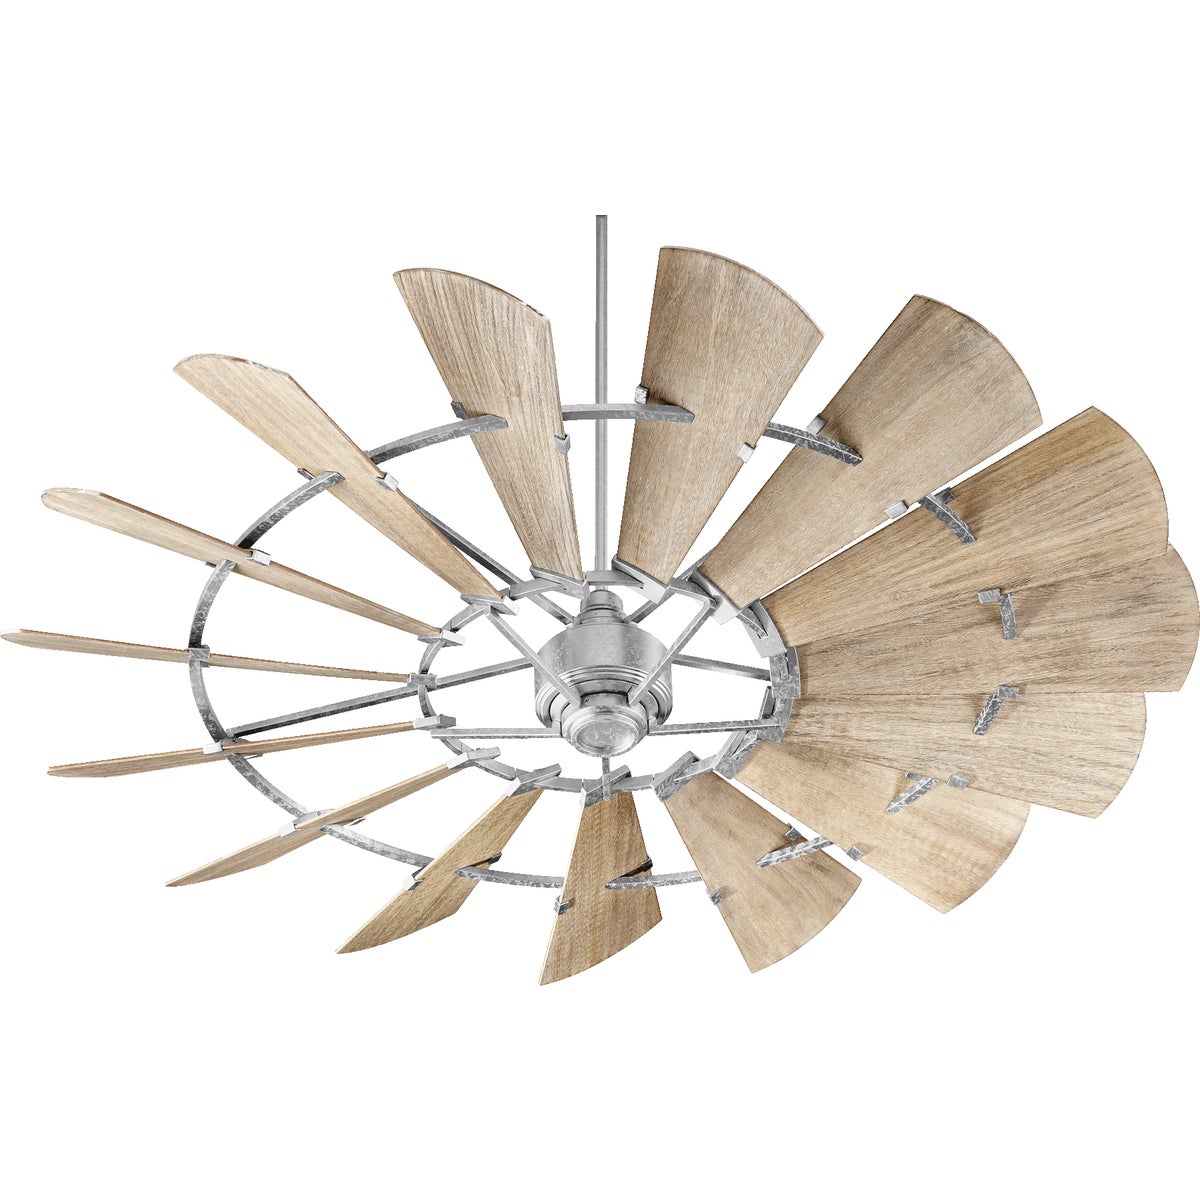 Farmhouse Ceiling Fan with 15 wooden blades in weathered oak finish, rustic design inspired by outdoor windmills. Quorum International DC-165L motor, UL Listed, Dry Location safety rating. Dimensions: 16.5"H x 72"W. Limited Lifetime warranty.